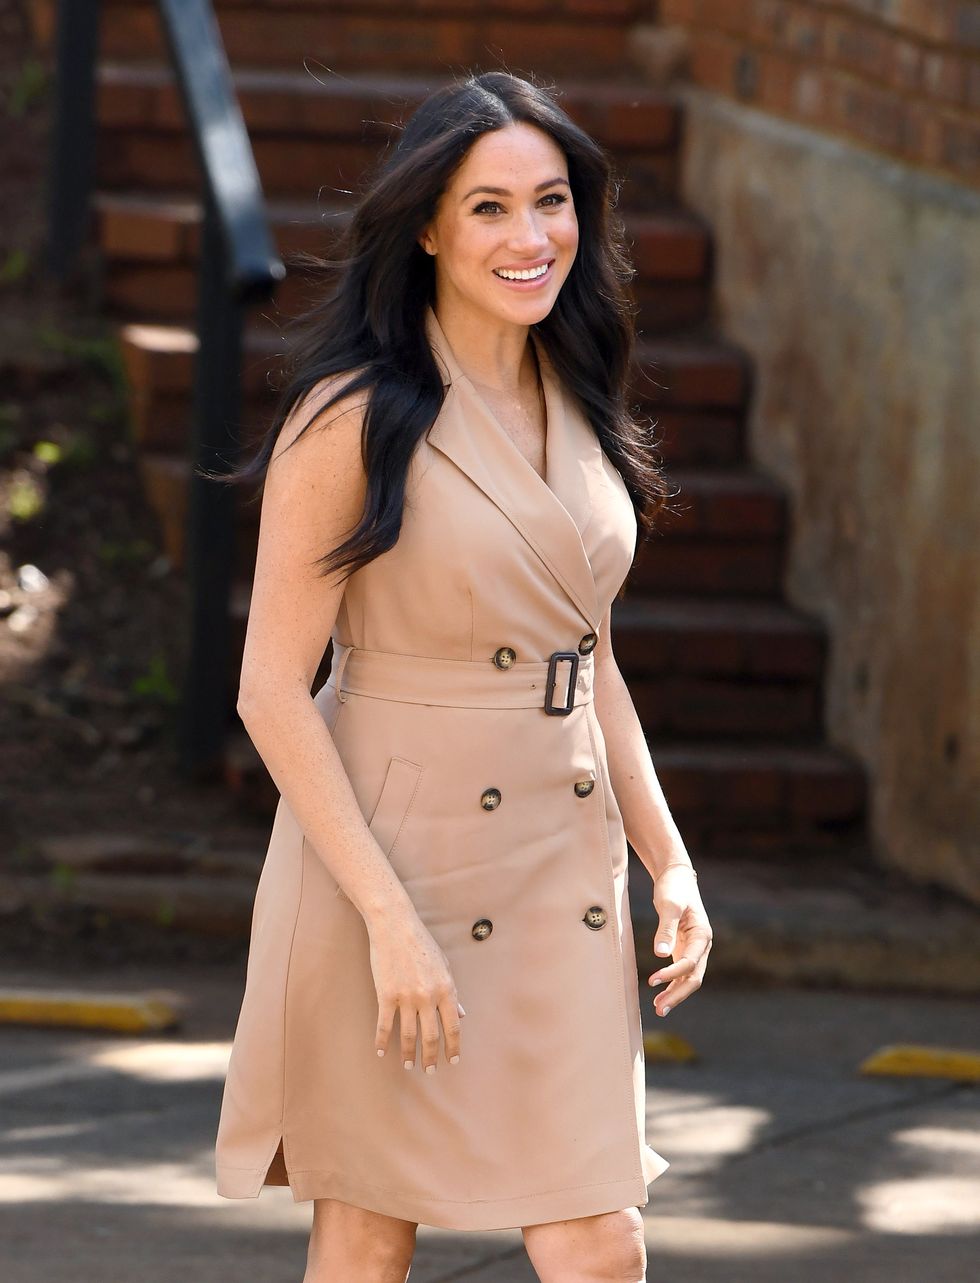 johannesburg, south africa october 01 meghan, duchess of sussex visits the university of johannesburg on october 01, 2019 in johannesburg, south africa this is part of the duke and duchess of sussexs royal tour to south africa photo by karwai tangwireimage